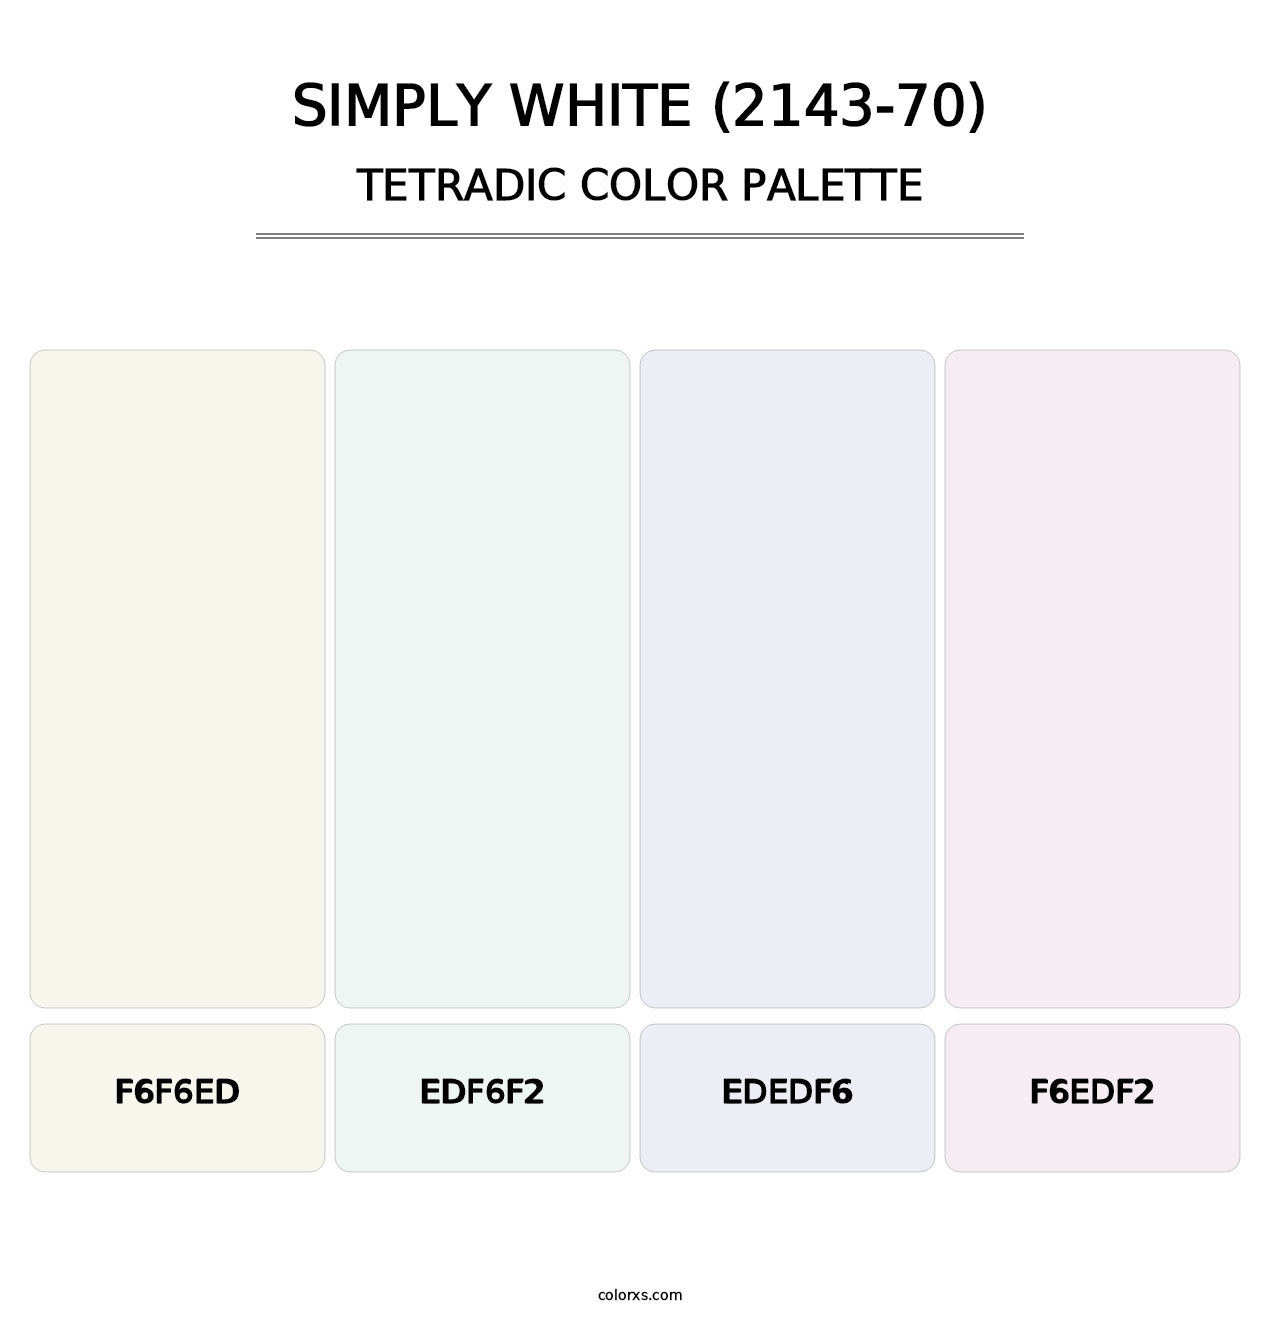 Simply White (2143-70) - Tetradic Color Palette